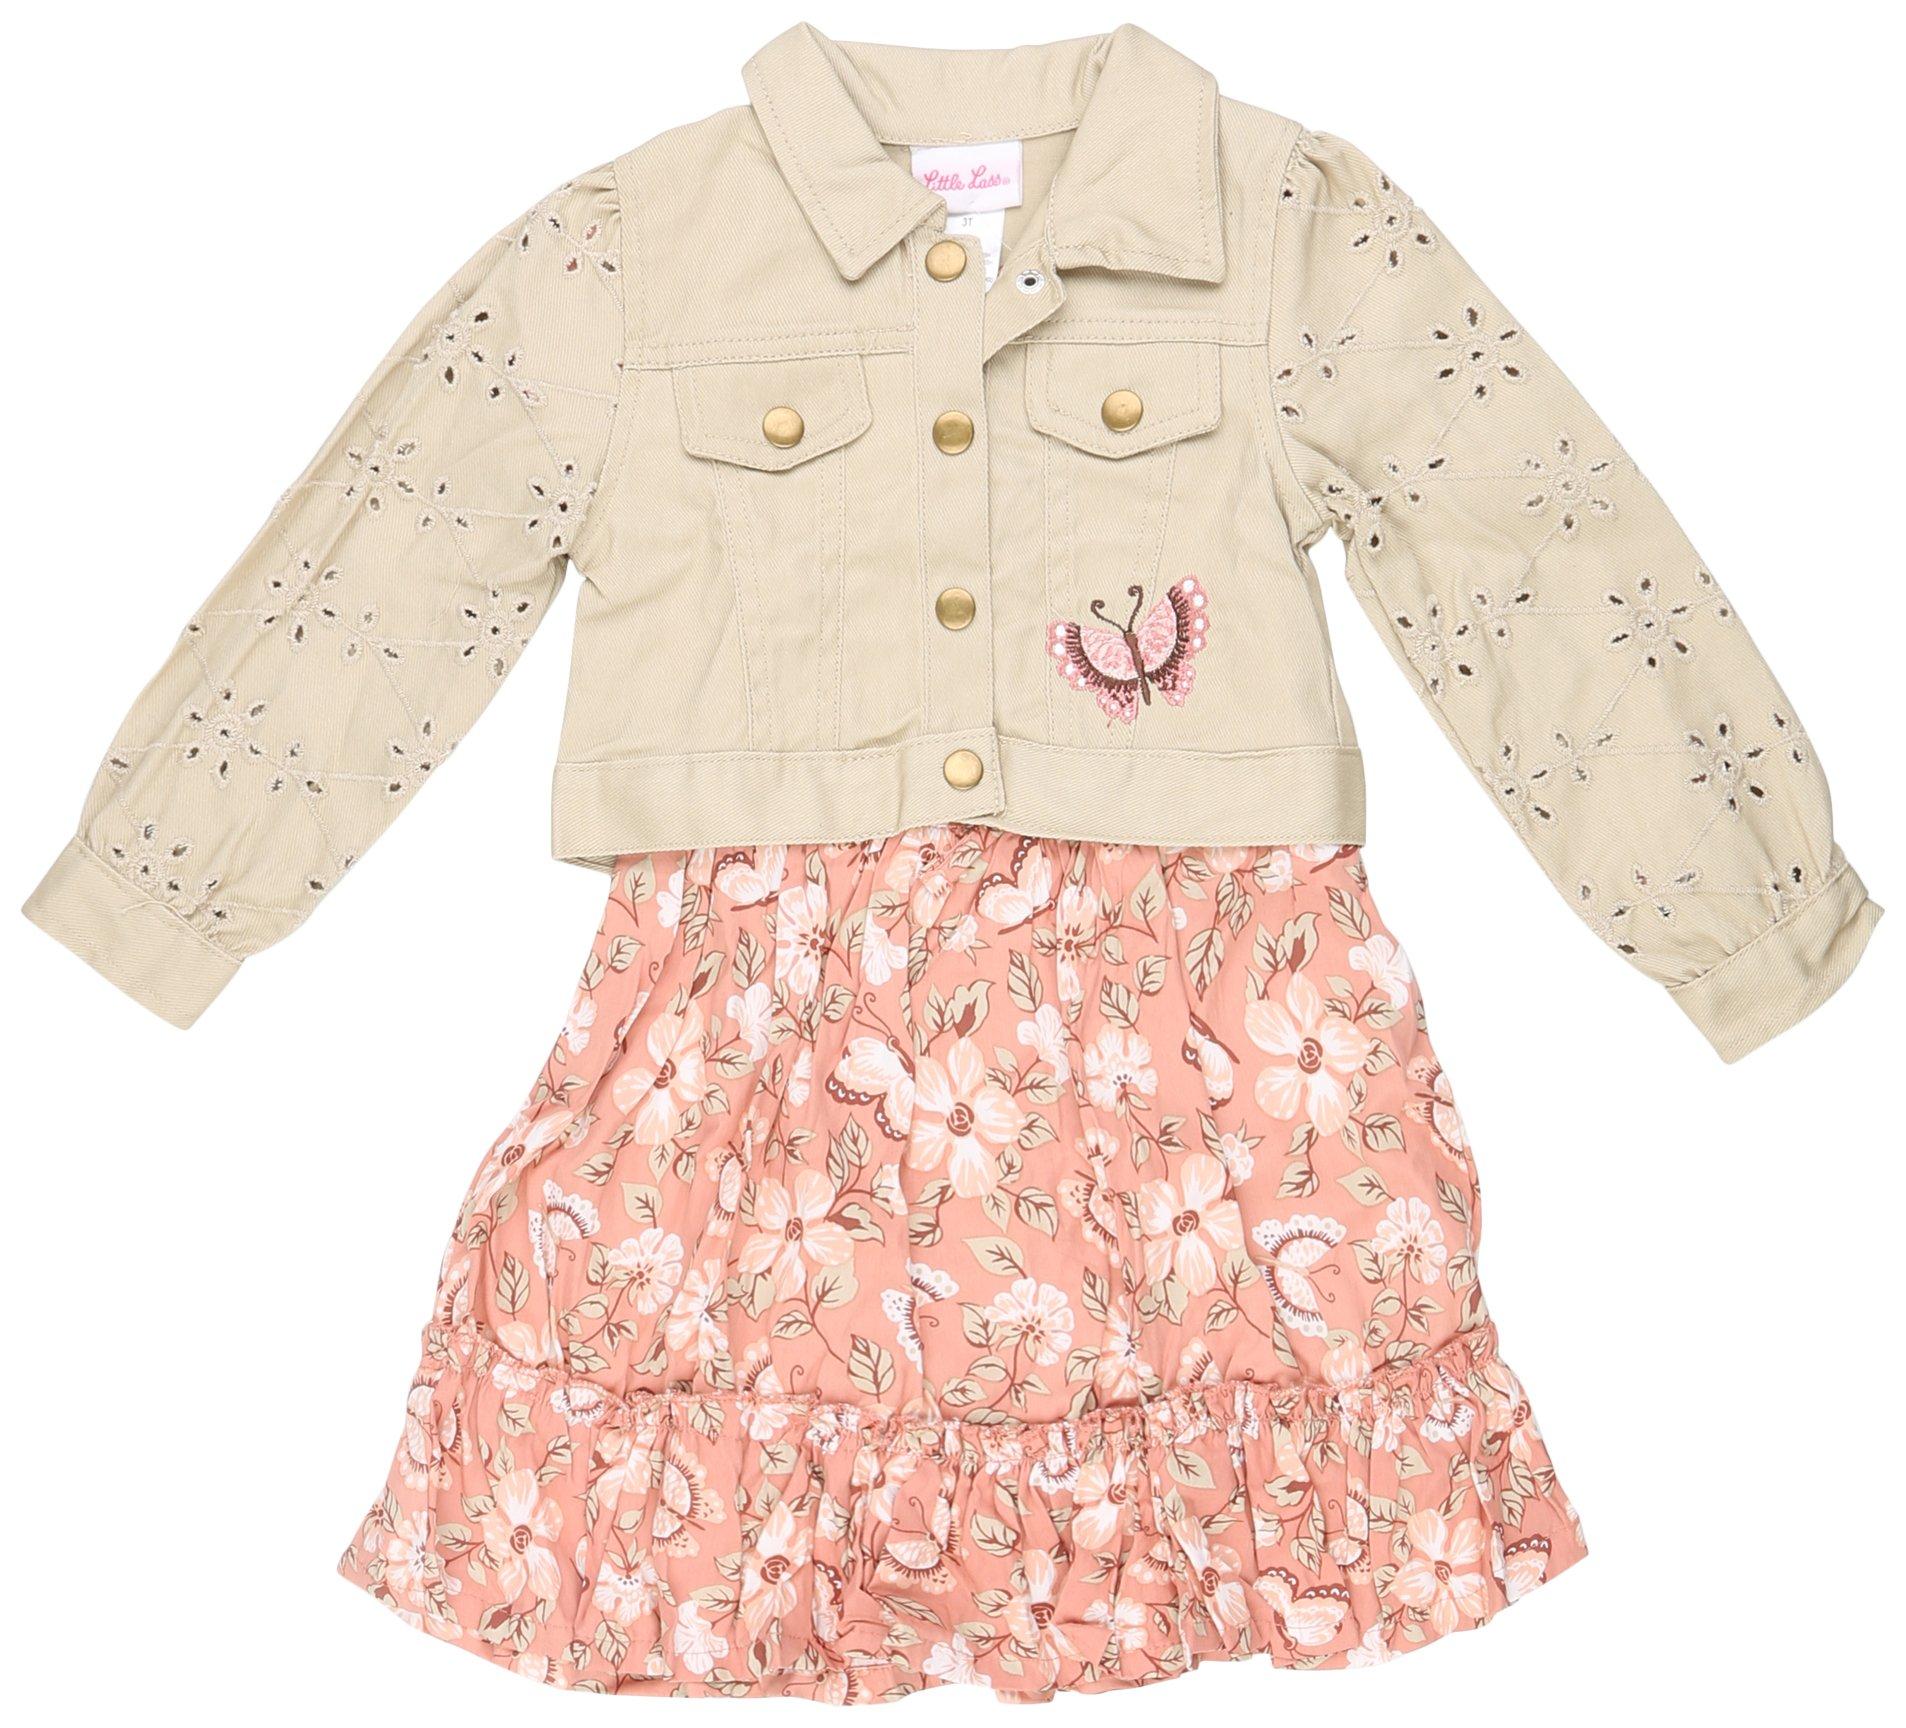 2T - 4T Girls' Clothes